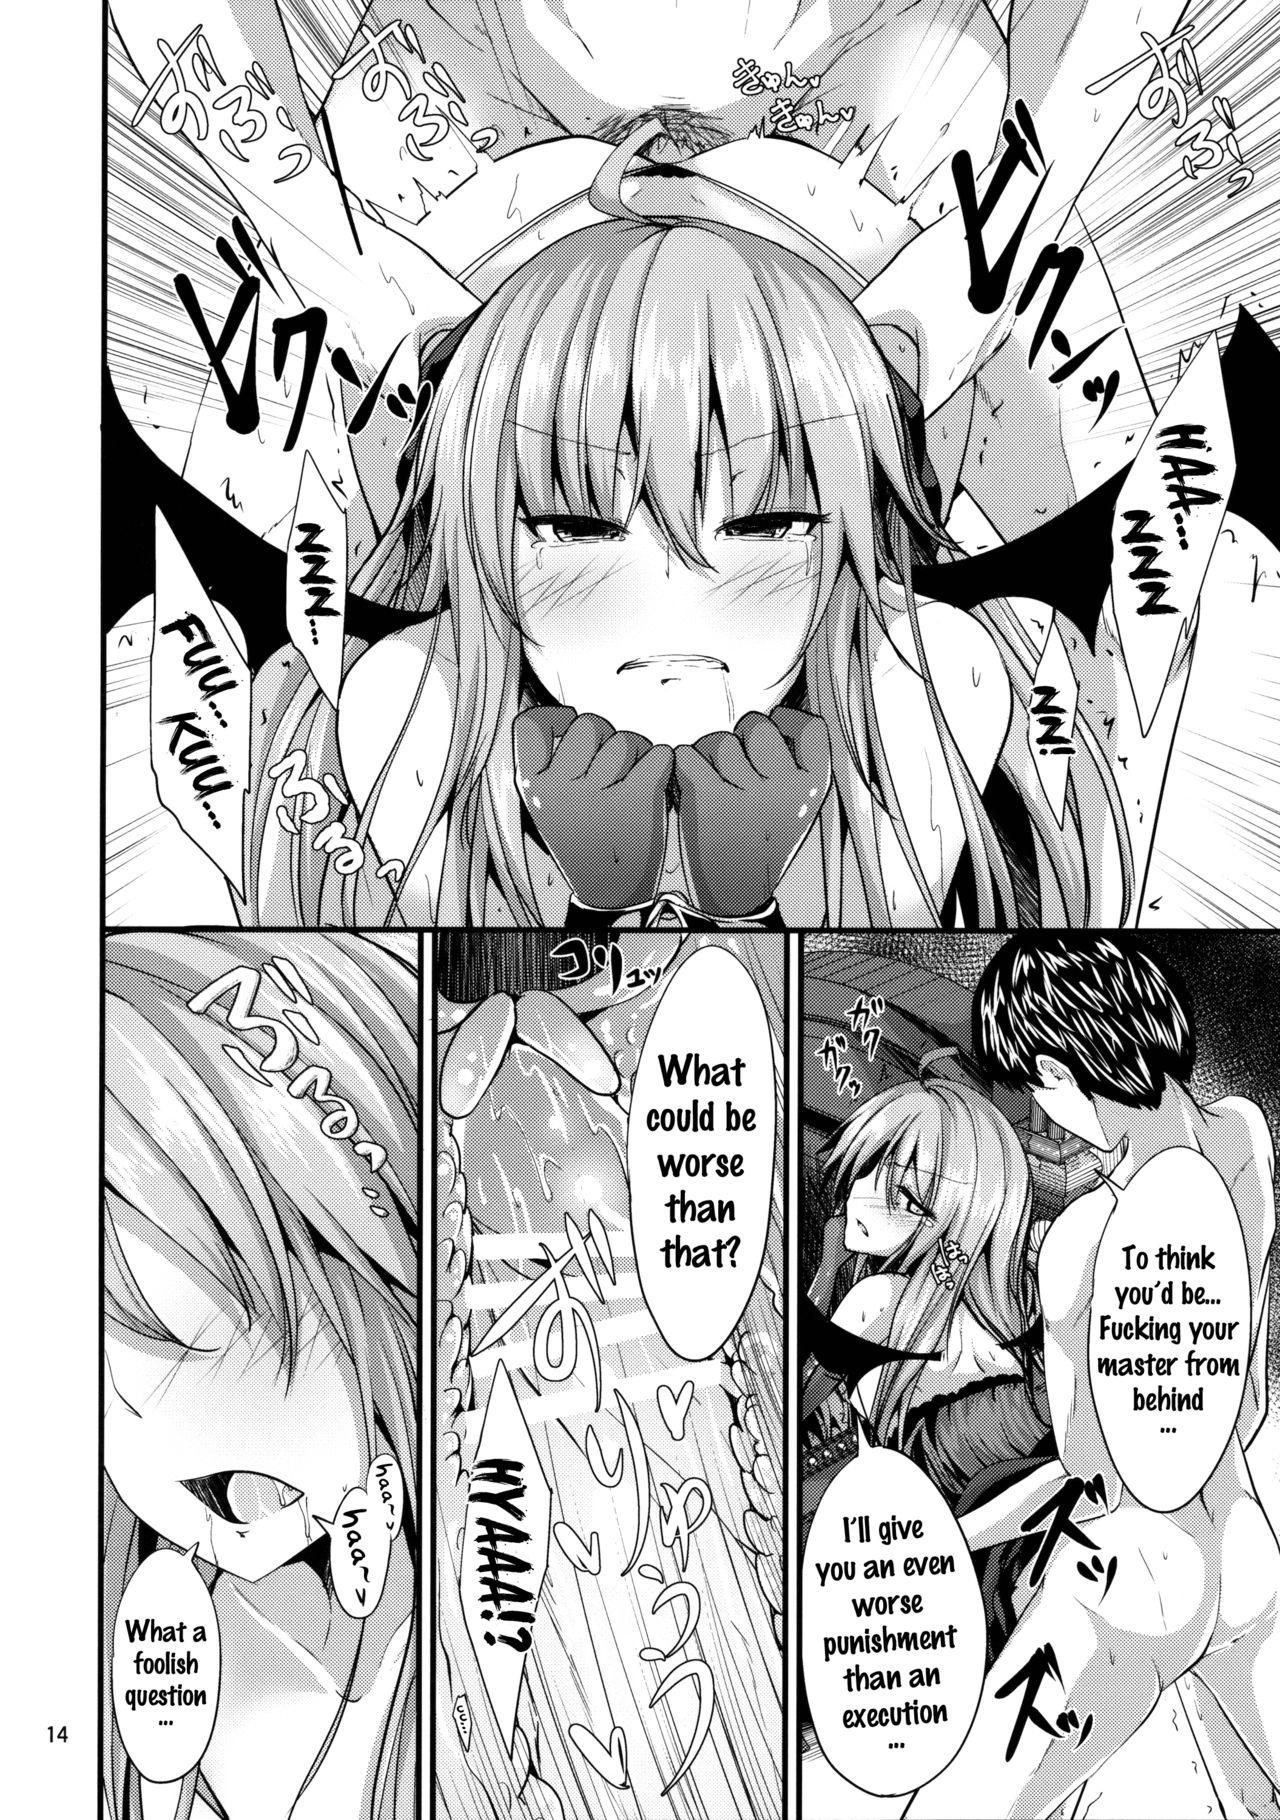 Car Remi no Motto Otona ni Narumon! | Remi's Becoming More of An Adult! - Touhou project Clothed - Page 13